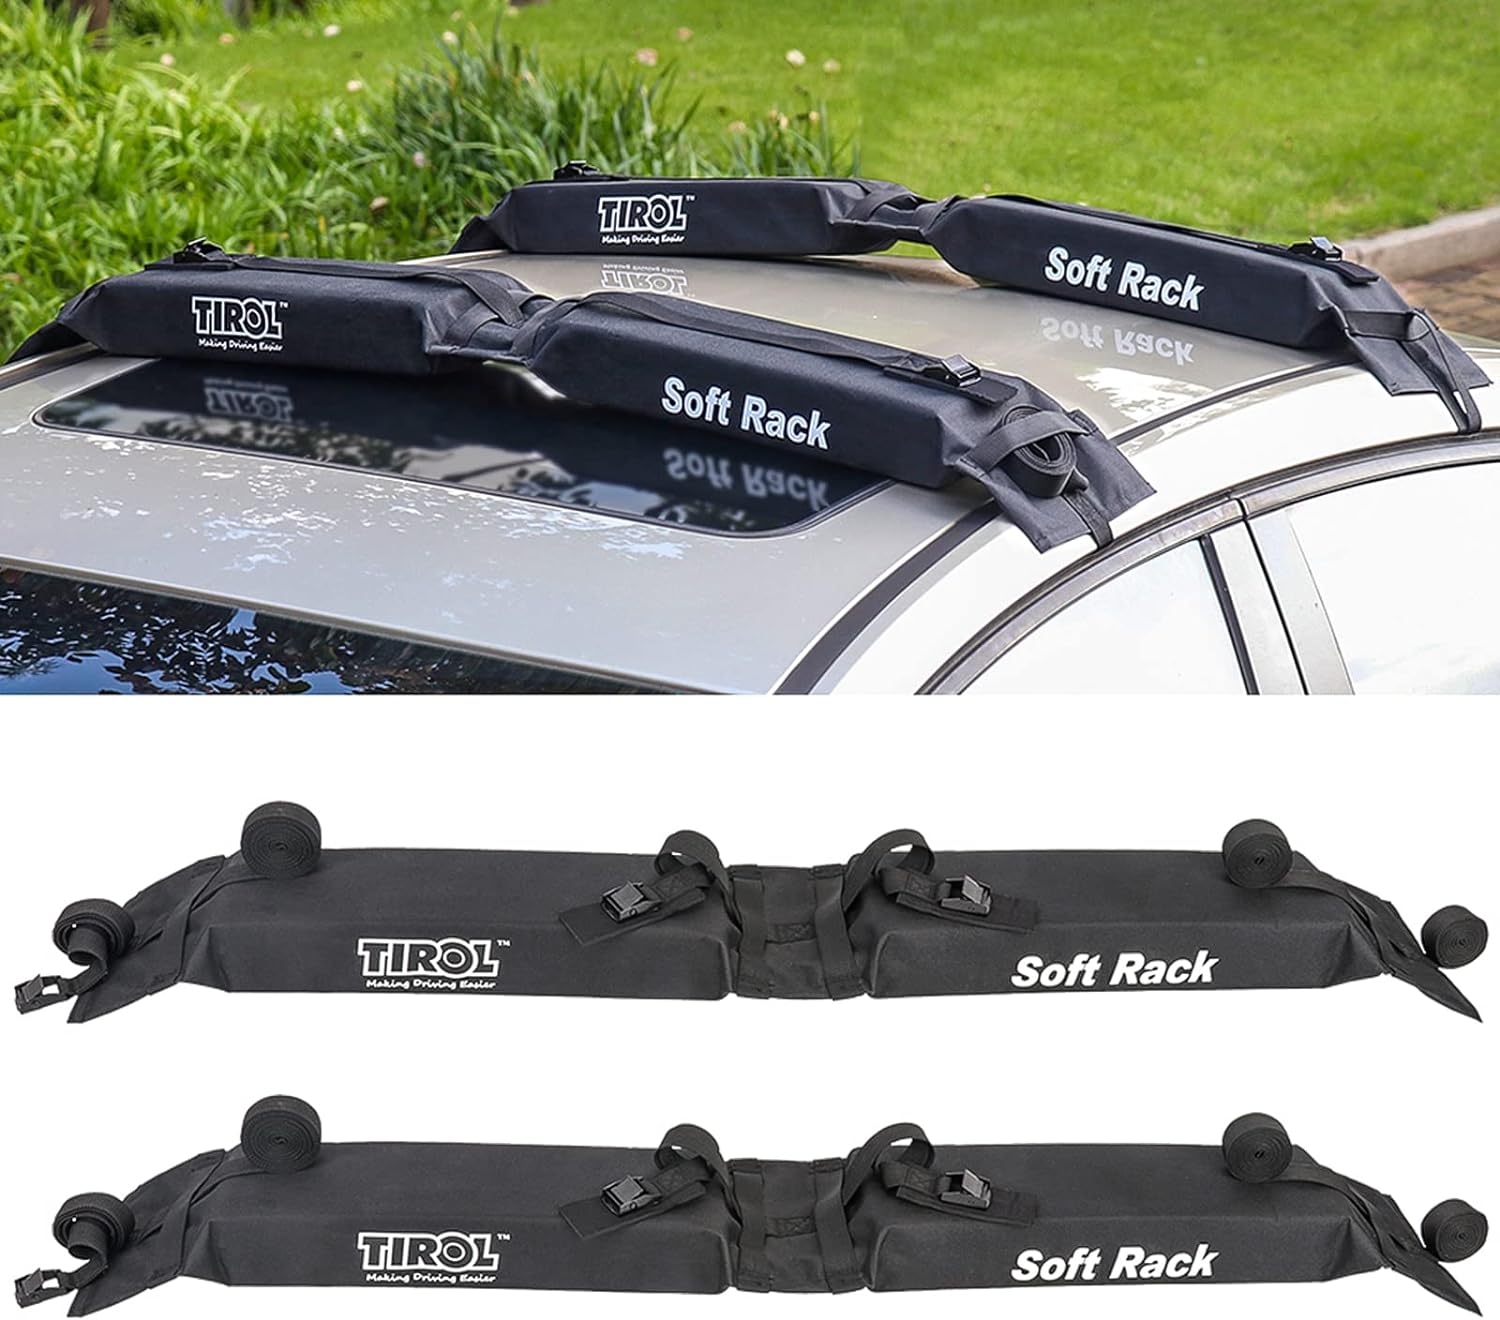 Tirol Soft Roof Rack 2 Pairs Kayak roof Rack Pads Load132lb Foldable Oxford Universal Luggage Top Roof Rack Cargo Carrie for Ka